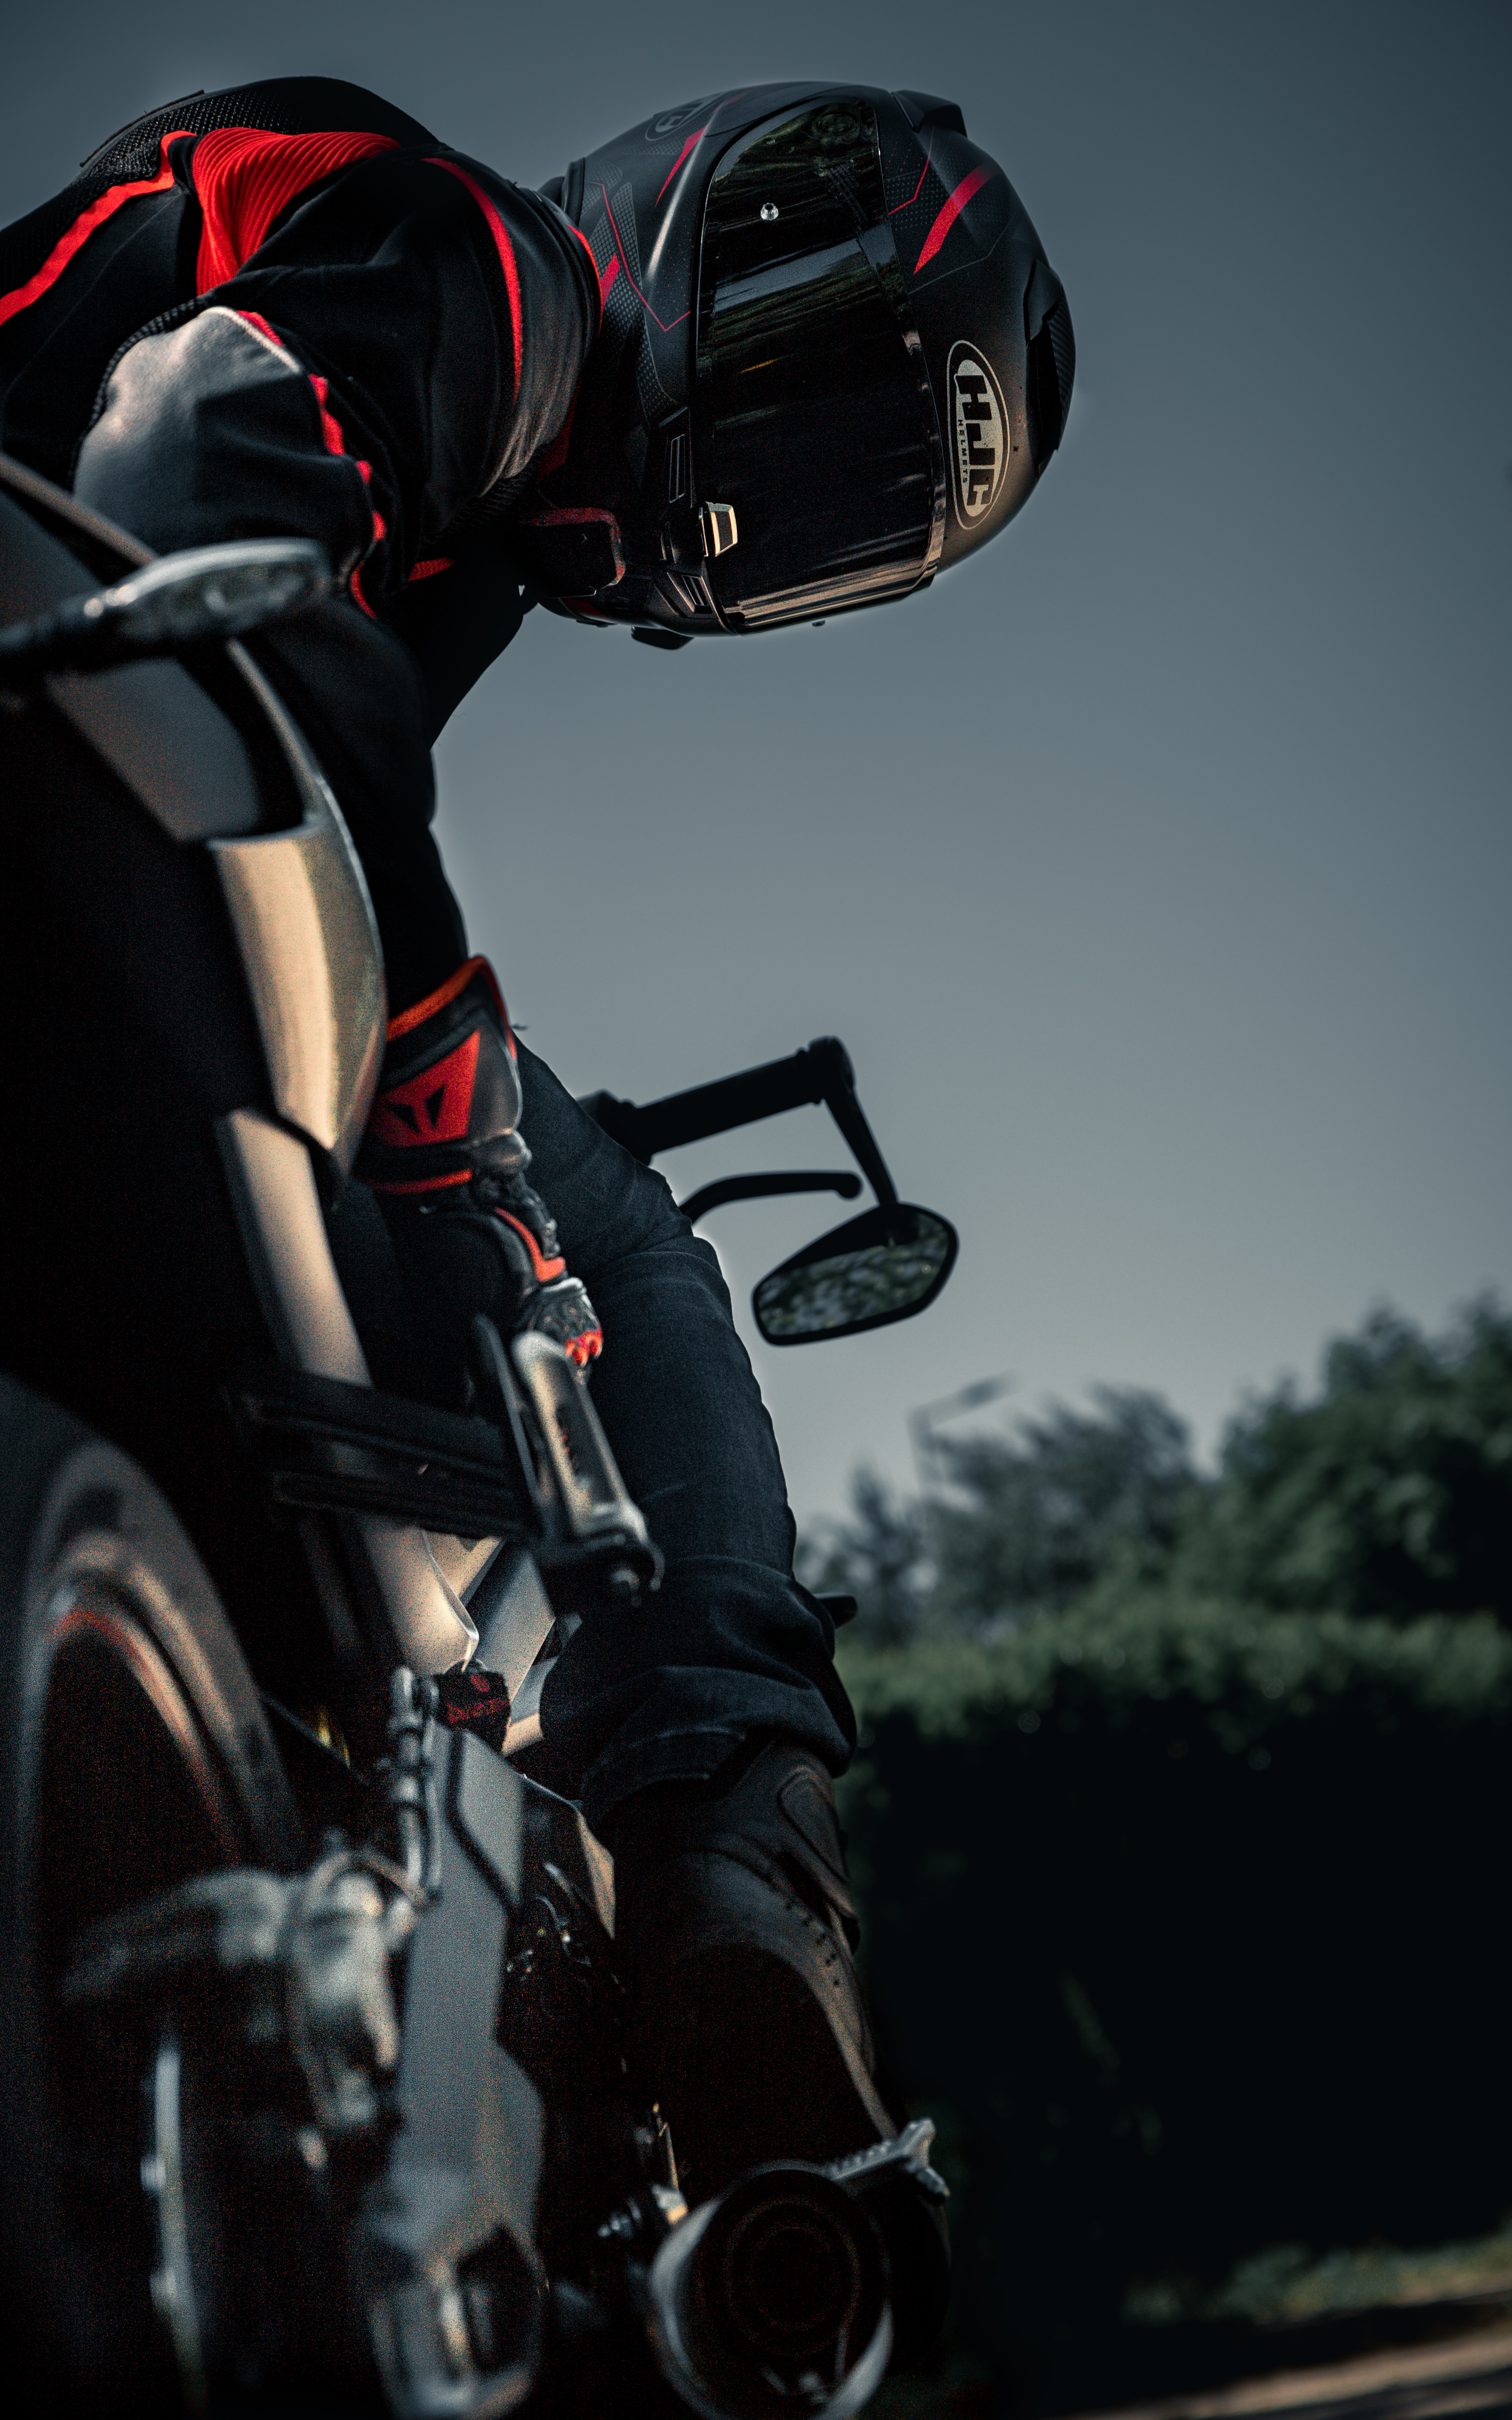 motorcyclist, helmet, motorcycles, motorcycle, equipment, outfit phone background